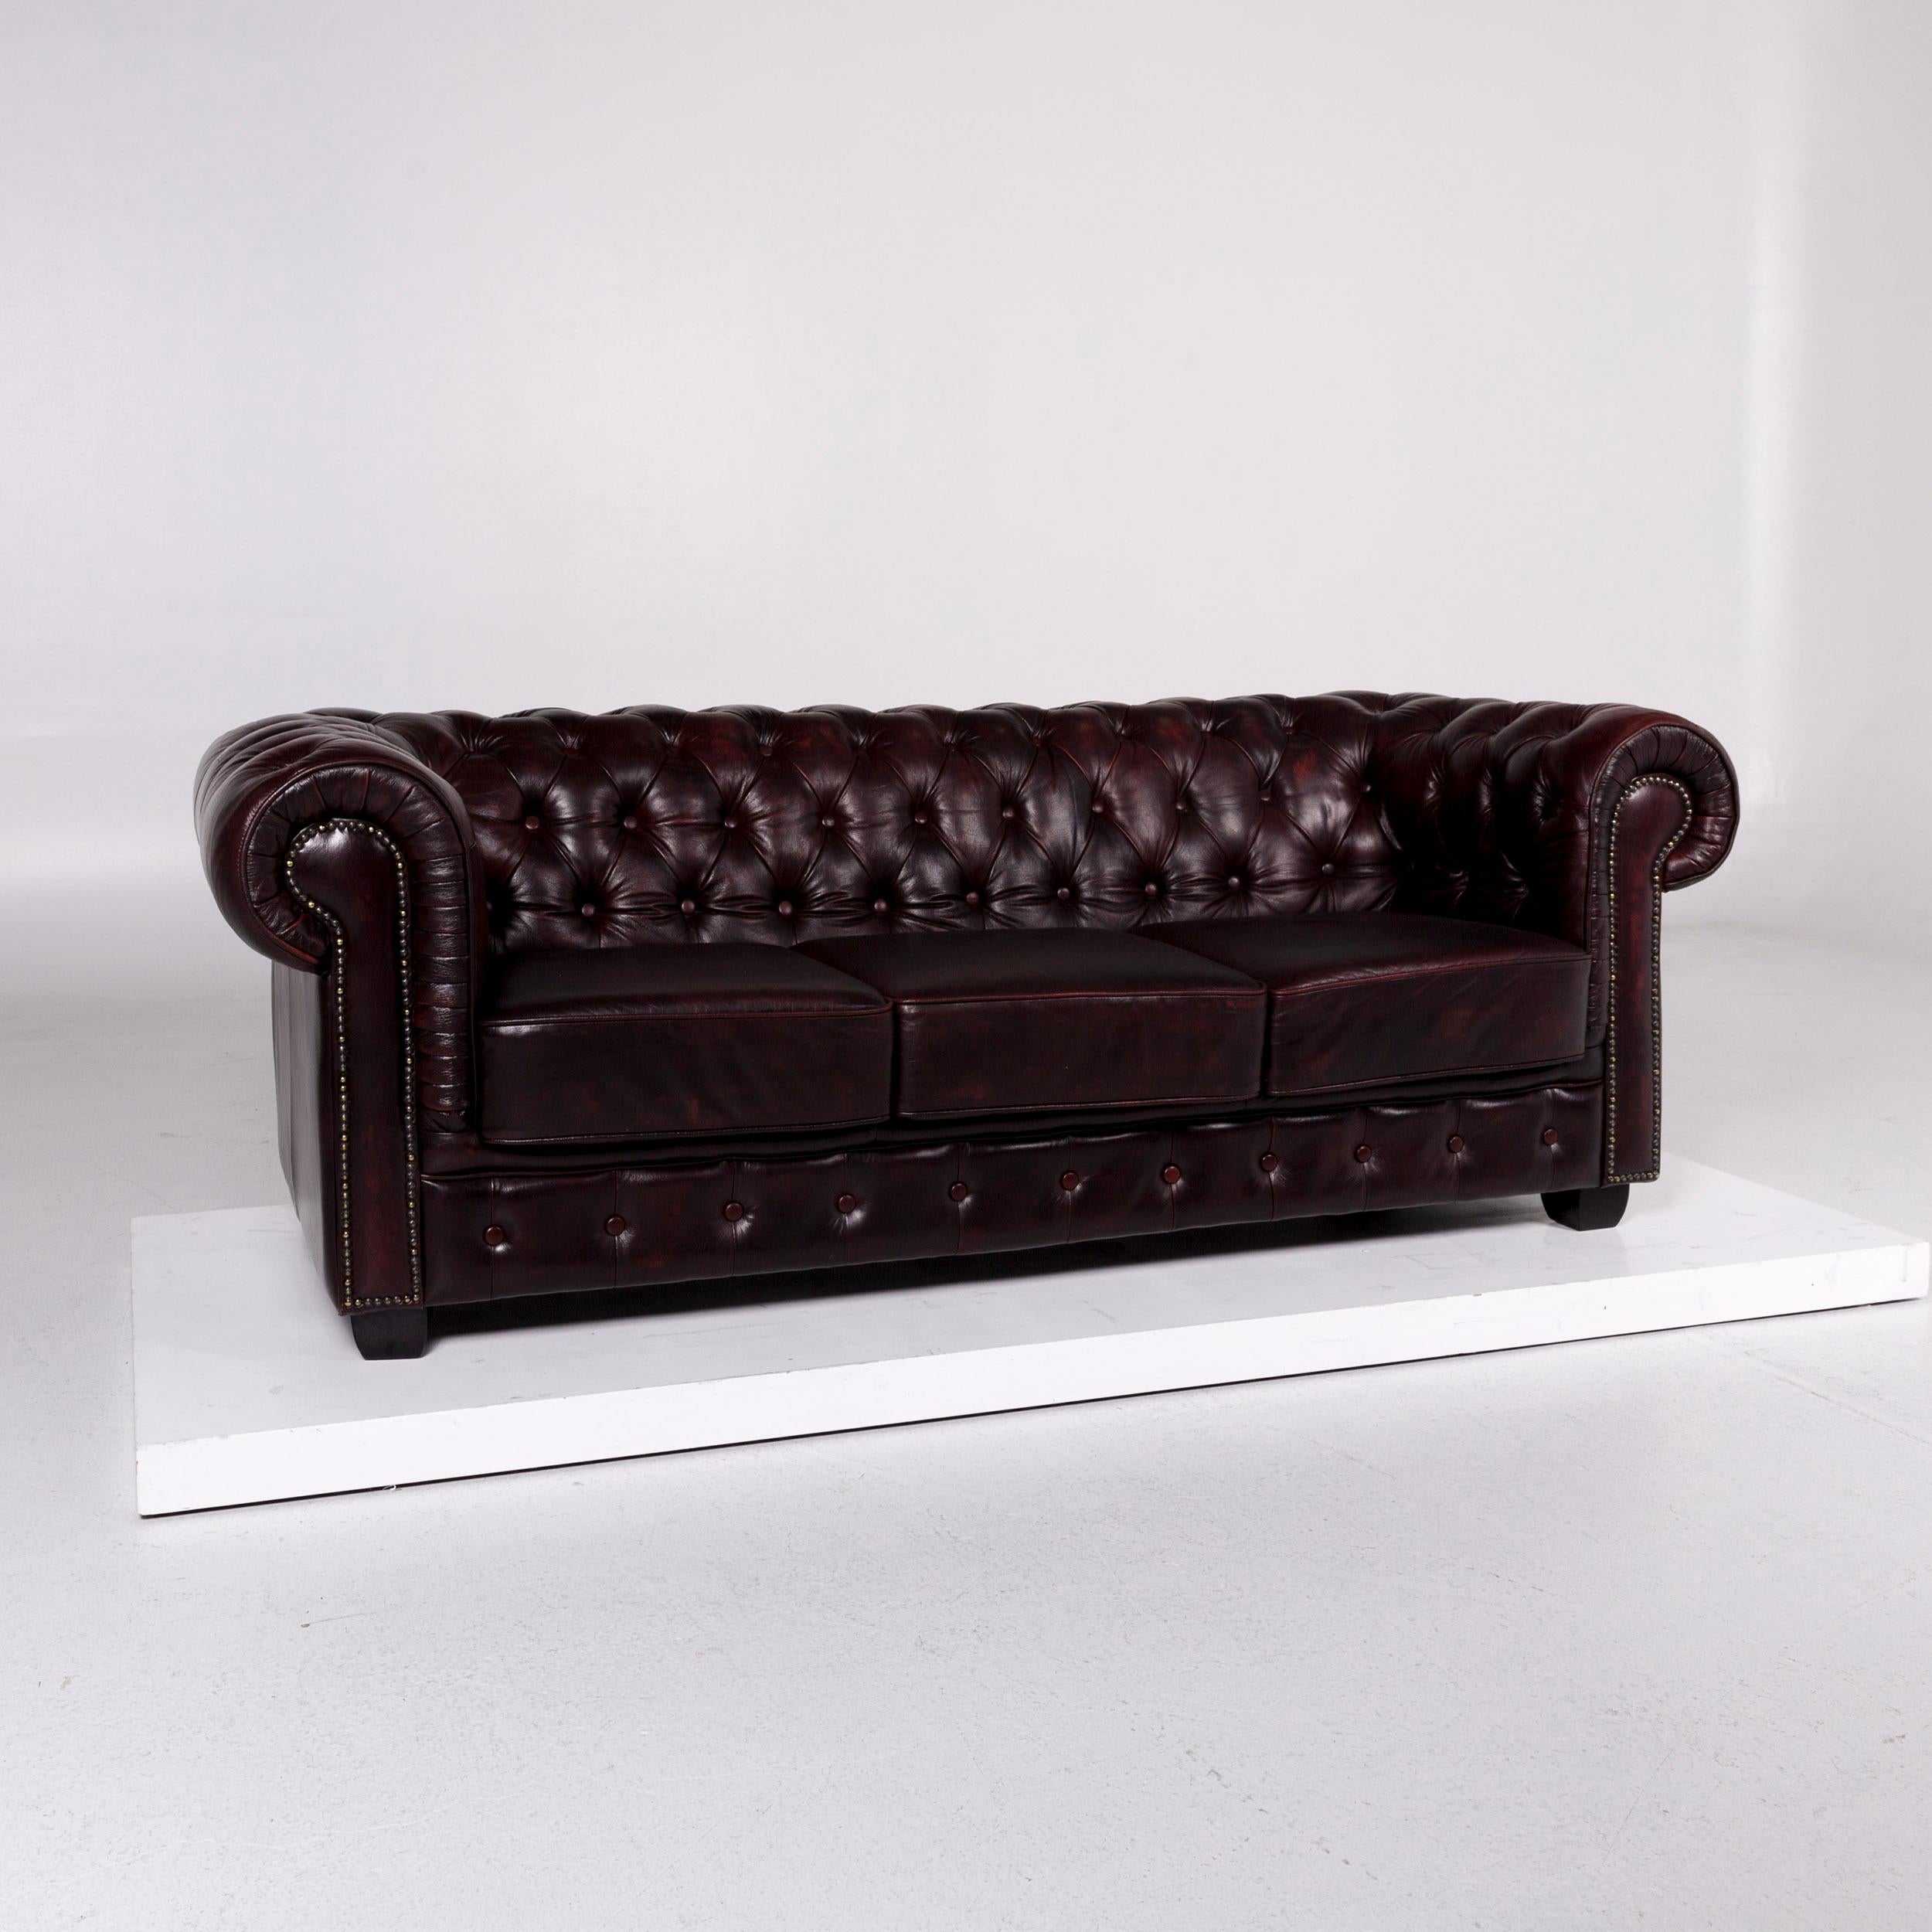 We bring to you a Chesterfield leather sofa red brown three-seat retro couch.
 
 Product measurements in centimeters:
 
Depth 97
Width 217
Height 78
Seat-height 46
Rest-height 77
Seat-depth 56
Seat-width 154
Back-height 32.
 